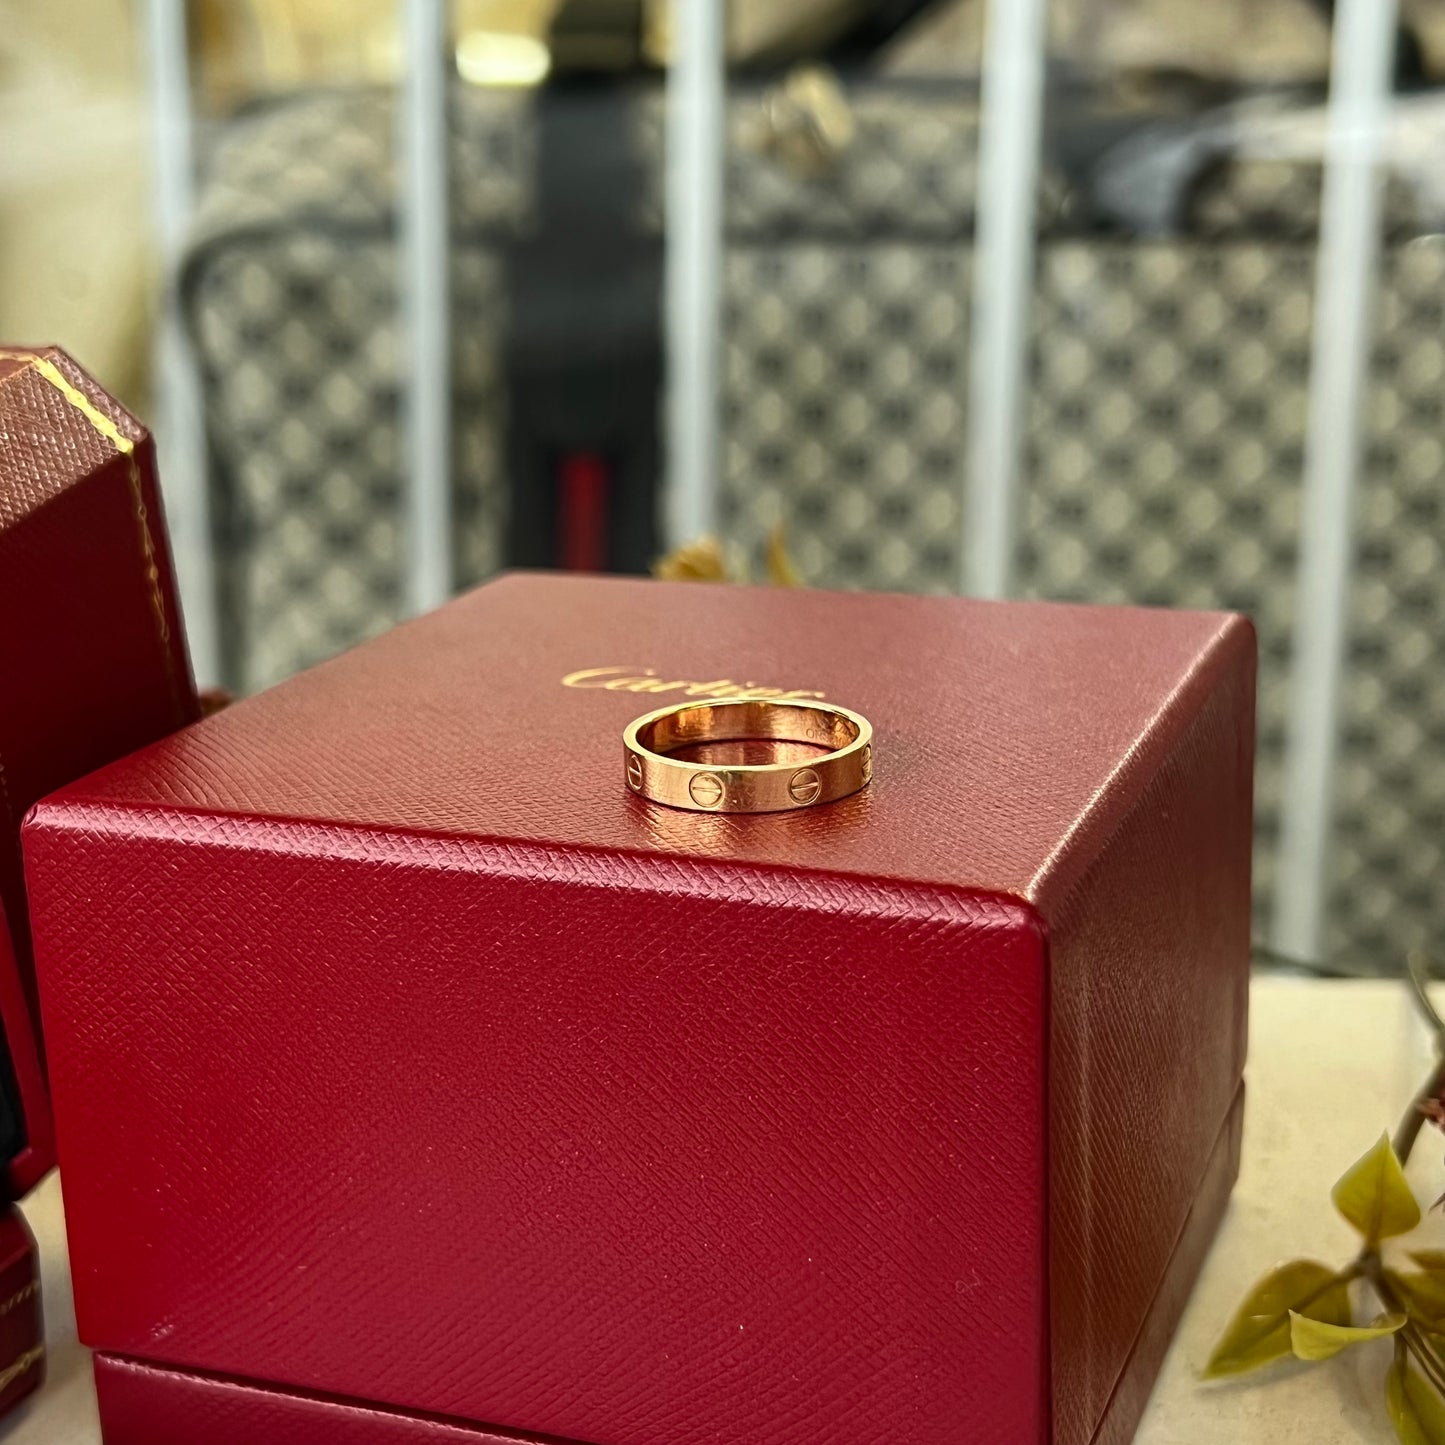 Cartier 18k Yellow Gold Love Ring with Box & Certificate, Size 56/ 7.5